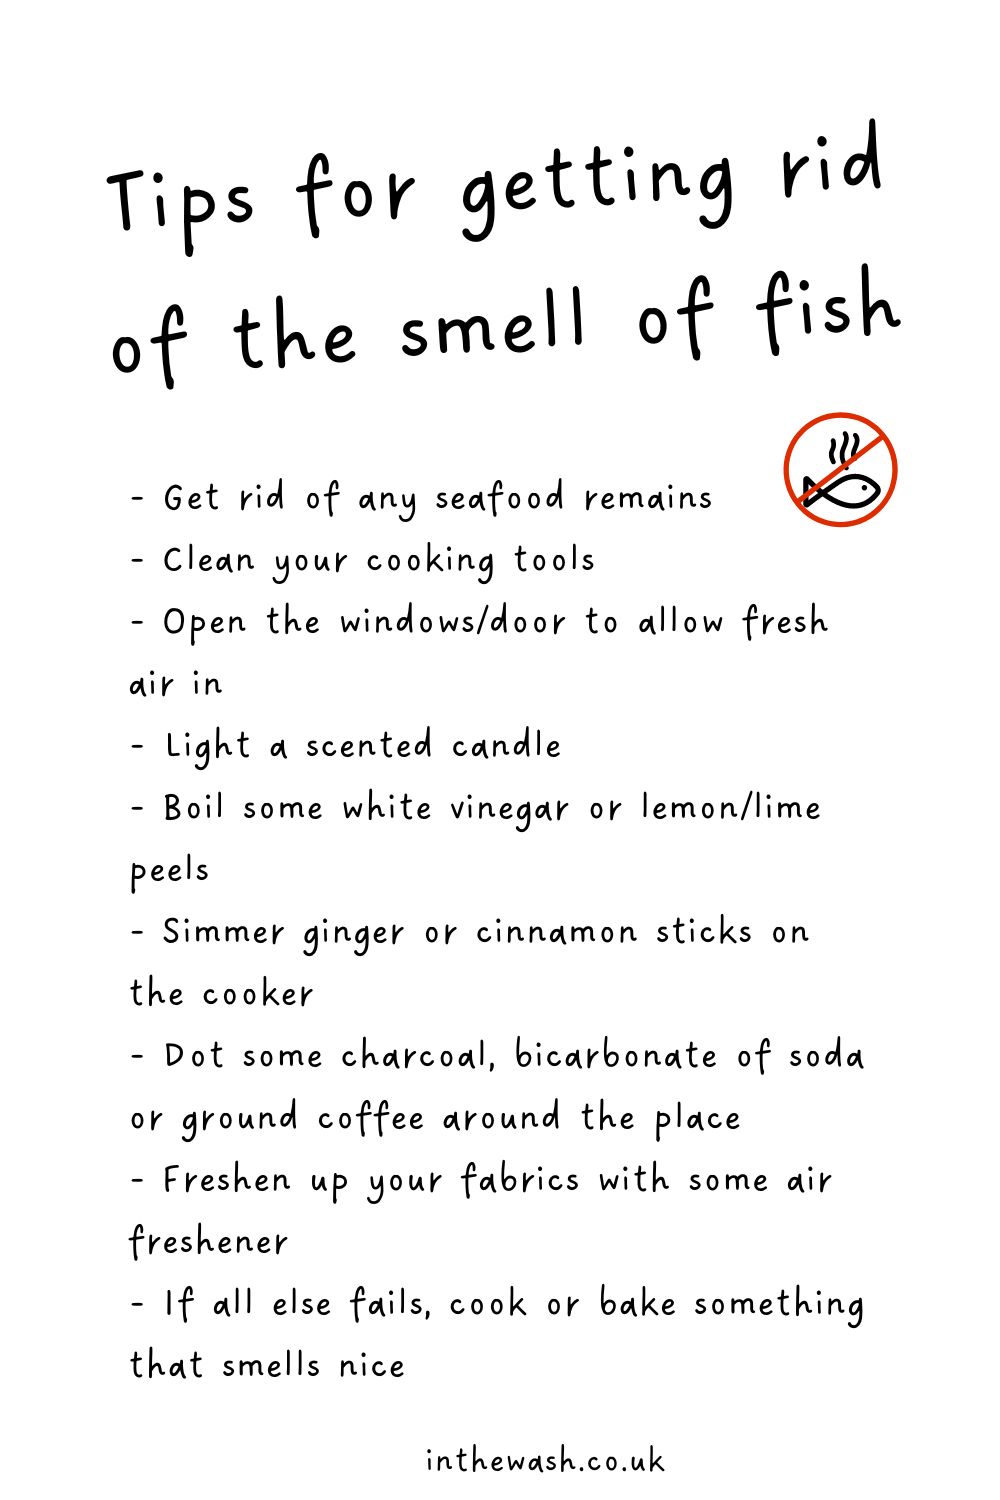 Tips for getting rid of the smell of fish